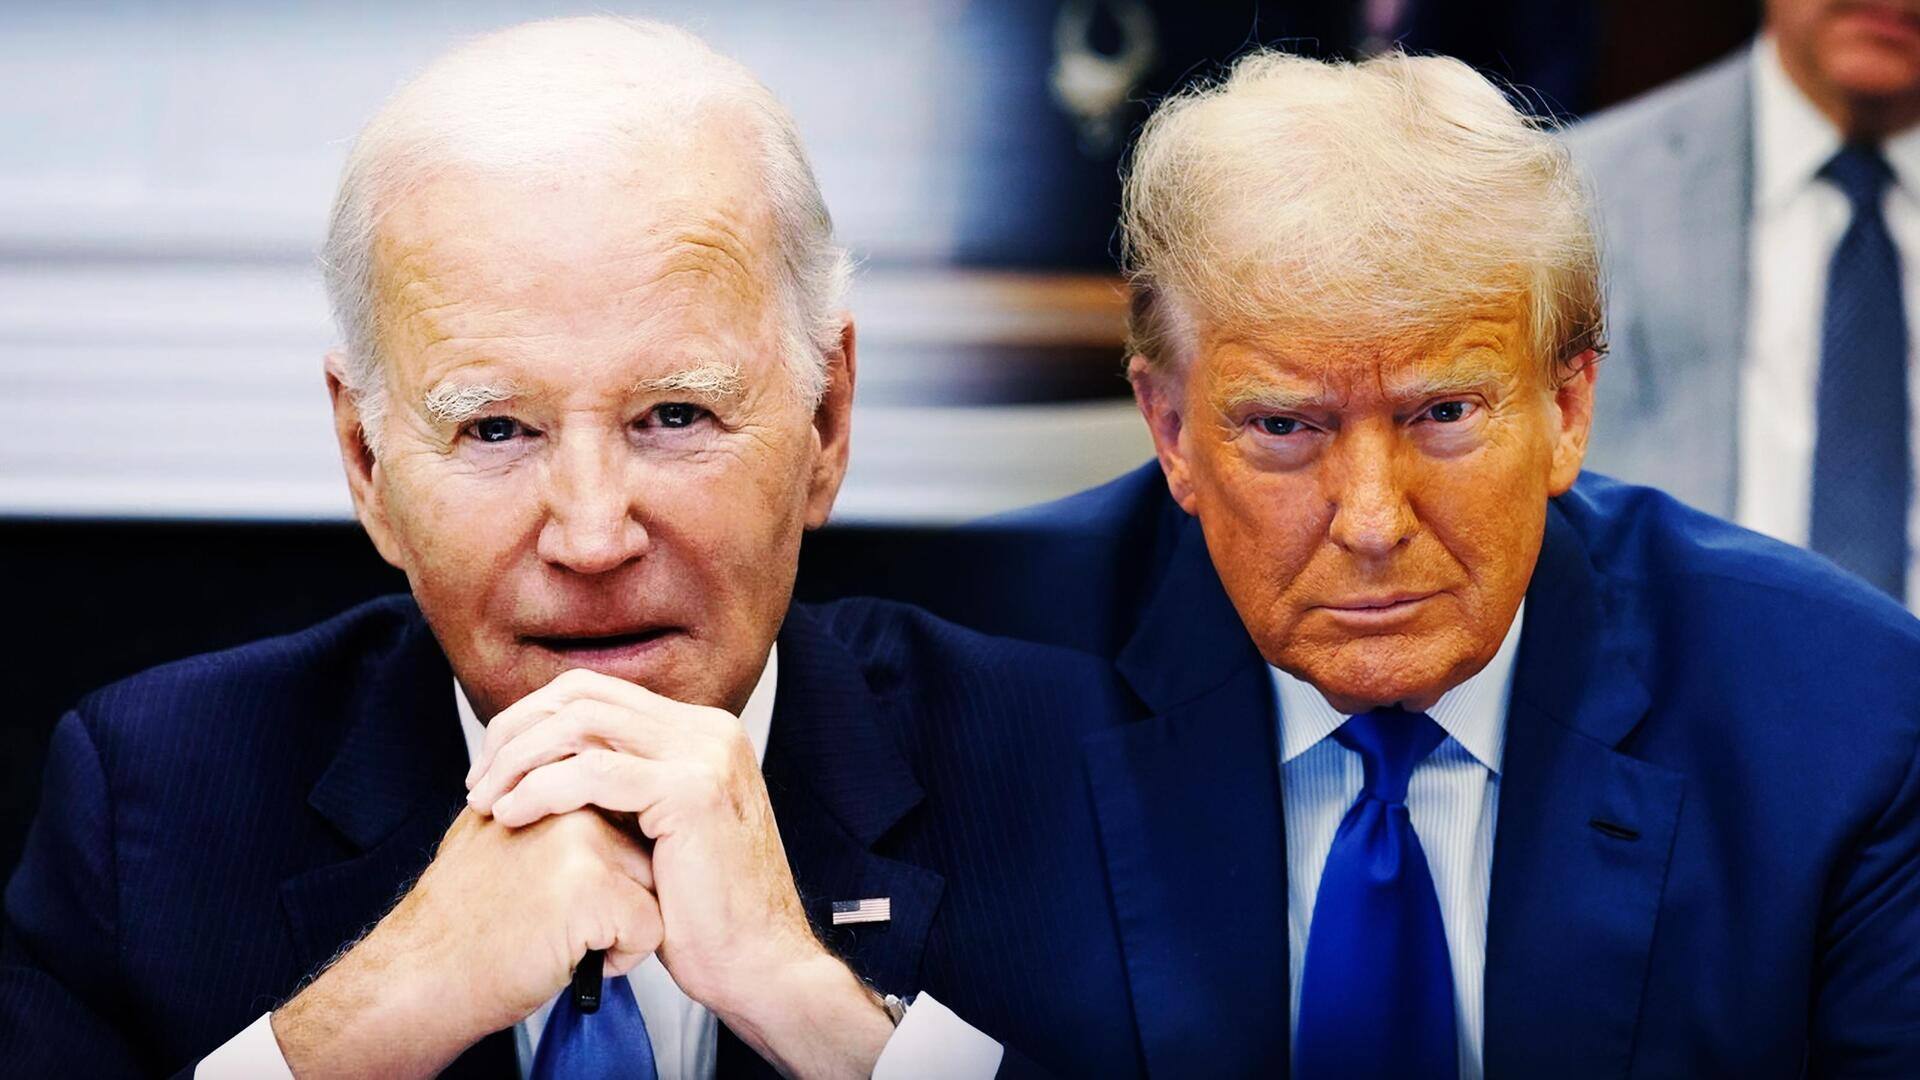 Explained: 'Super Tuesday' likely to kick off Biden-Trump rematch